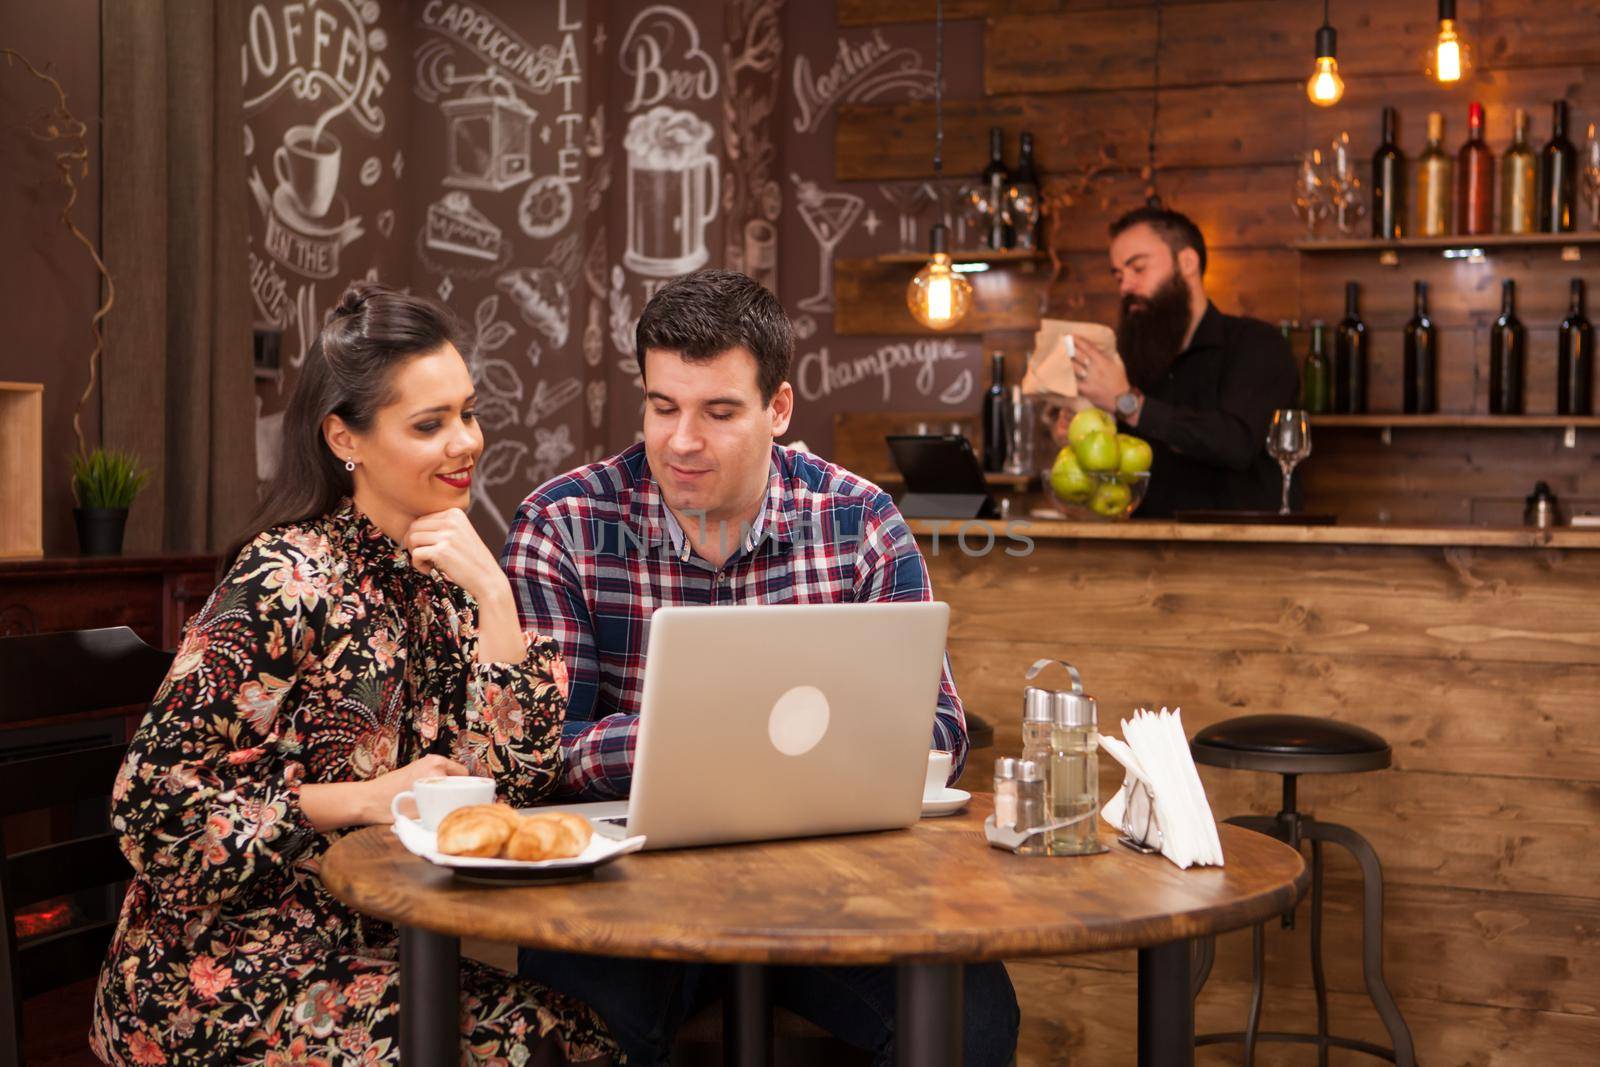 Attractive couple at a business meeting in the restaurant disucssing working moments at lunch time. Hipster pub.